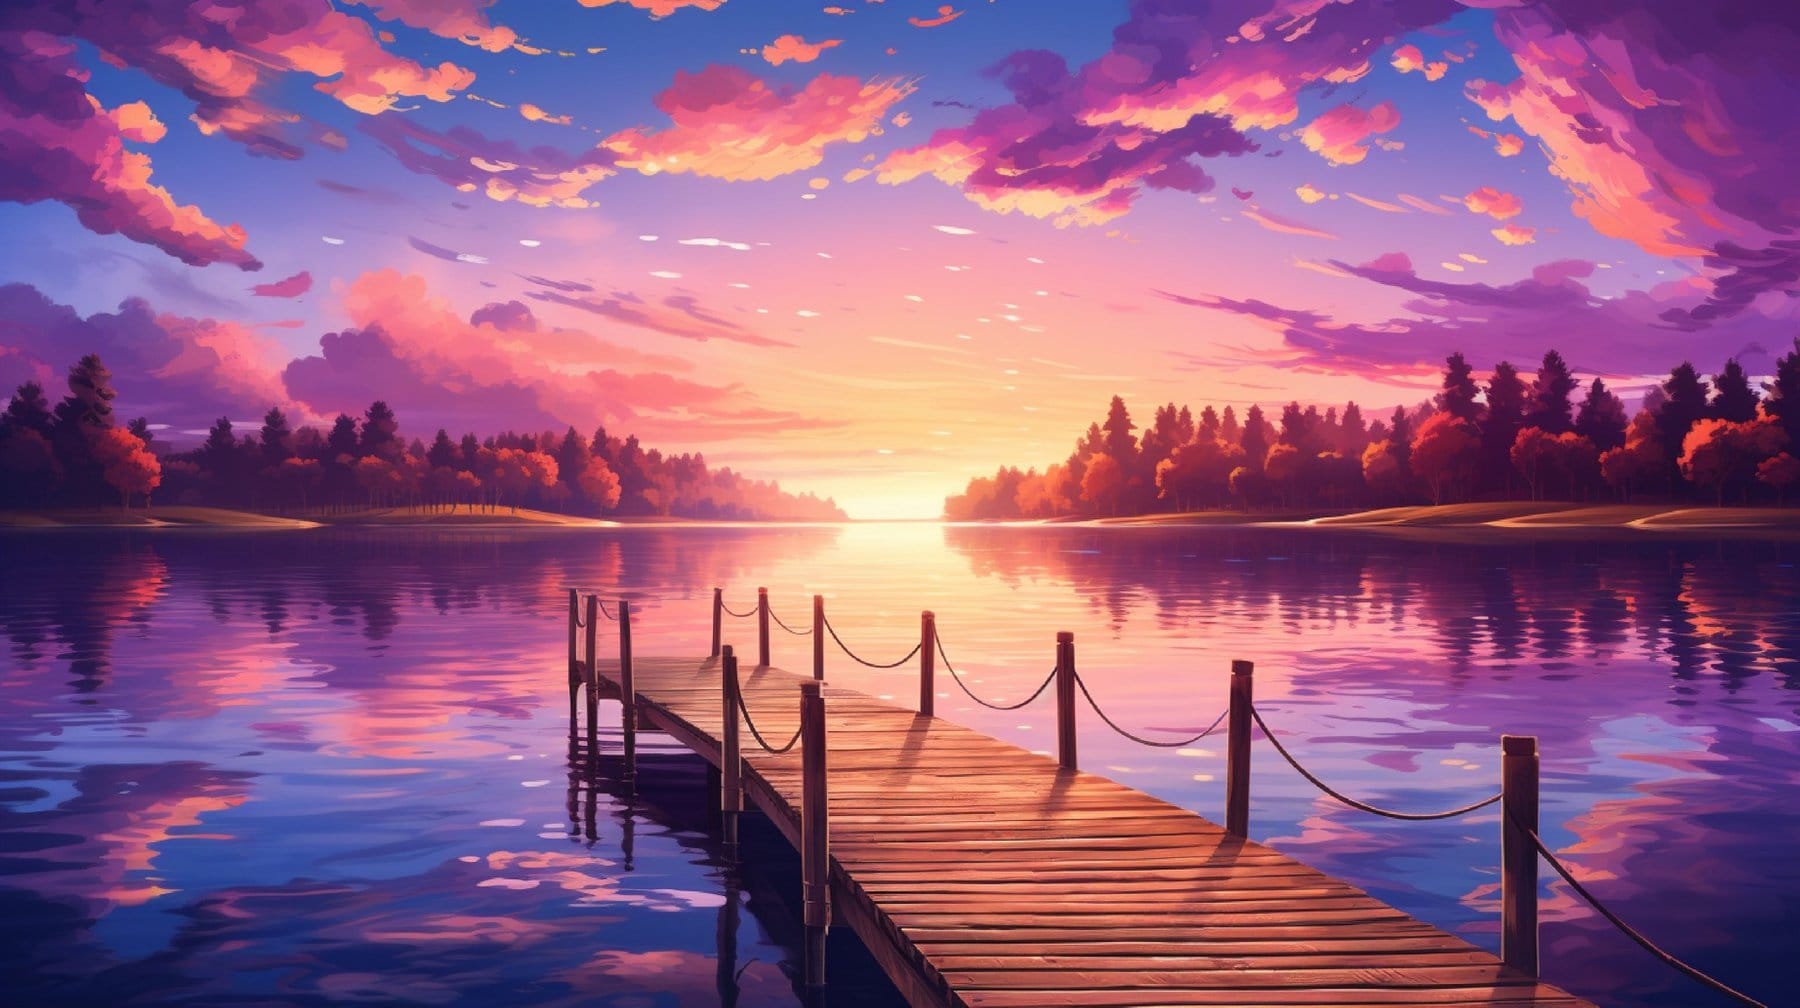 A tranquil lakeside scene with a wooden pier extending into the water, a rowboat tied to it, and a colorful sunset painting the sky with hues of pink and purple